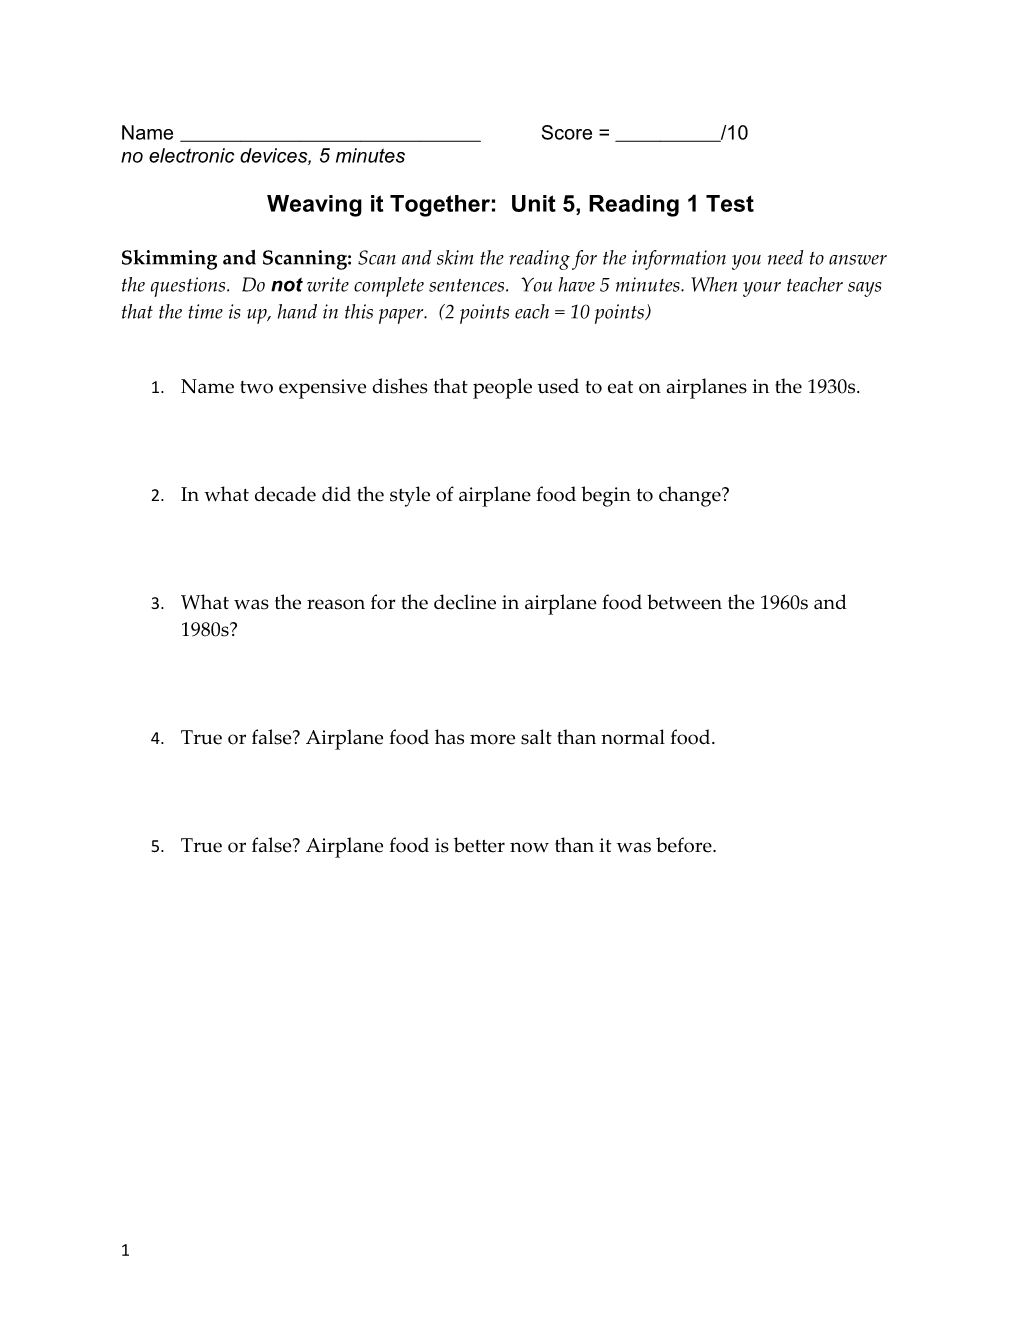 Weaving It Together: Unit 5, Reading 1 Test